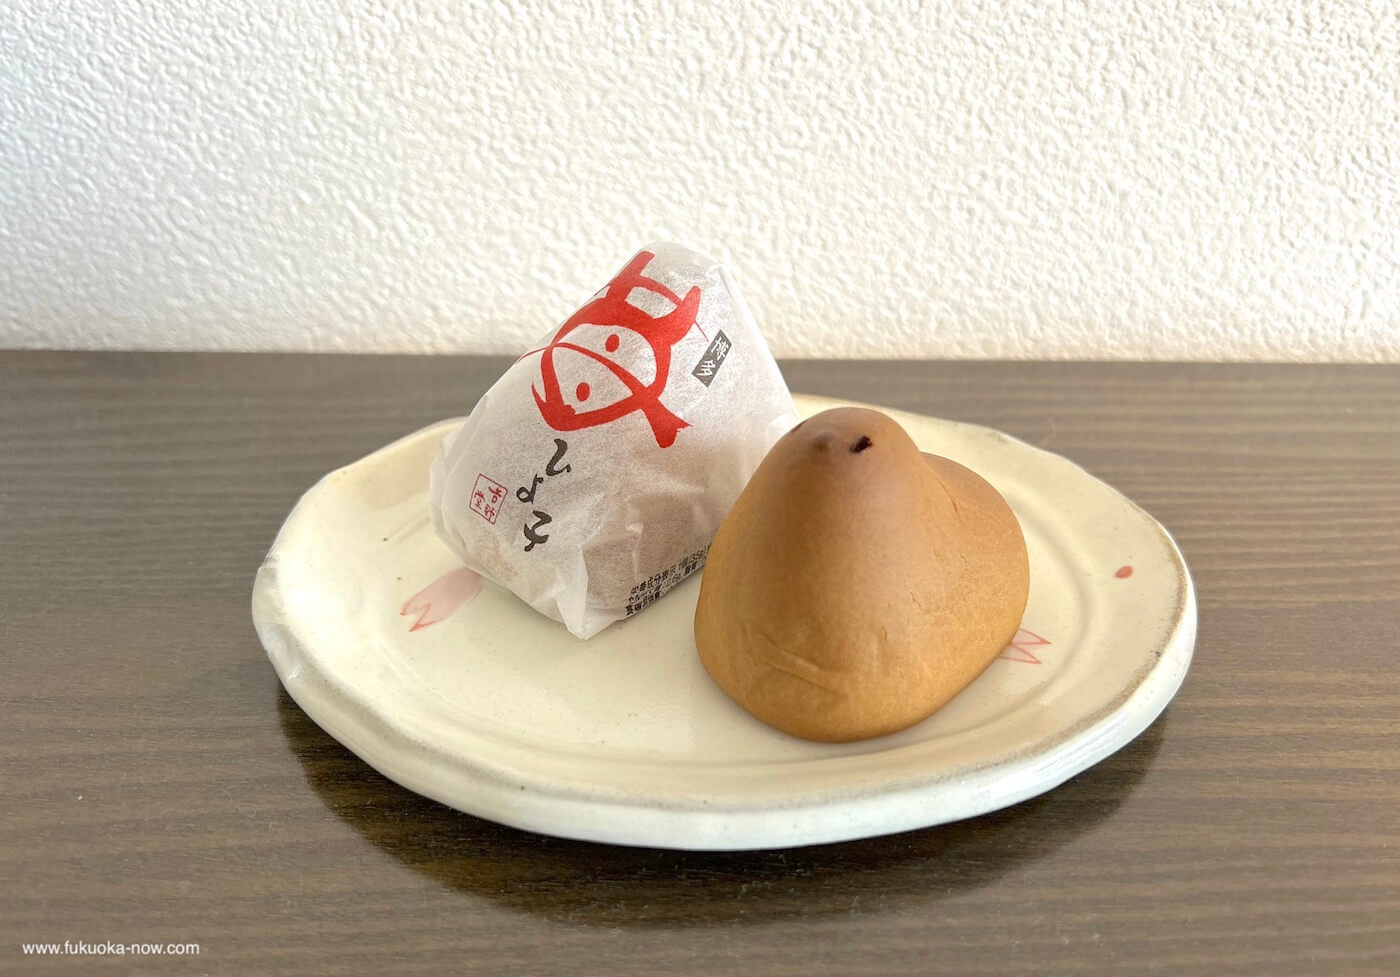 Delicious Discoveries: Fukuoka’s Irresistible Sweets for Souvenirs, お土産にも最適！福岡のお菓子